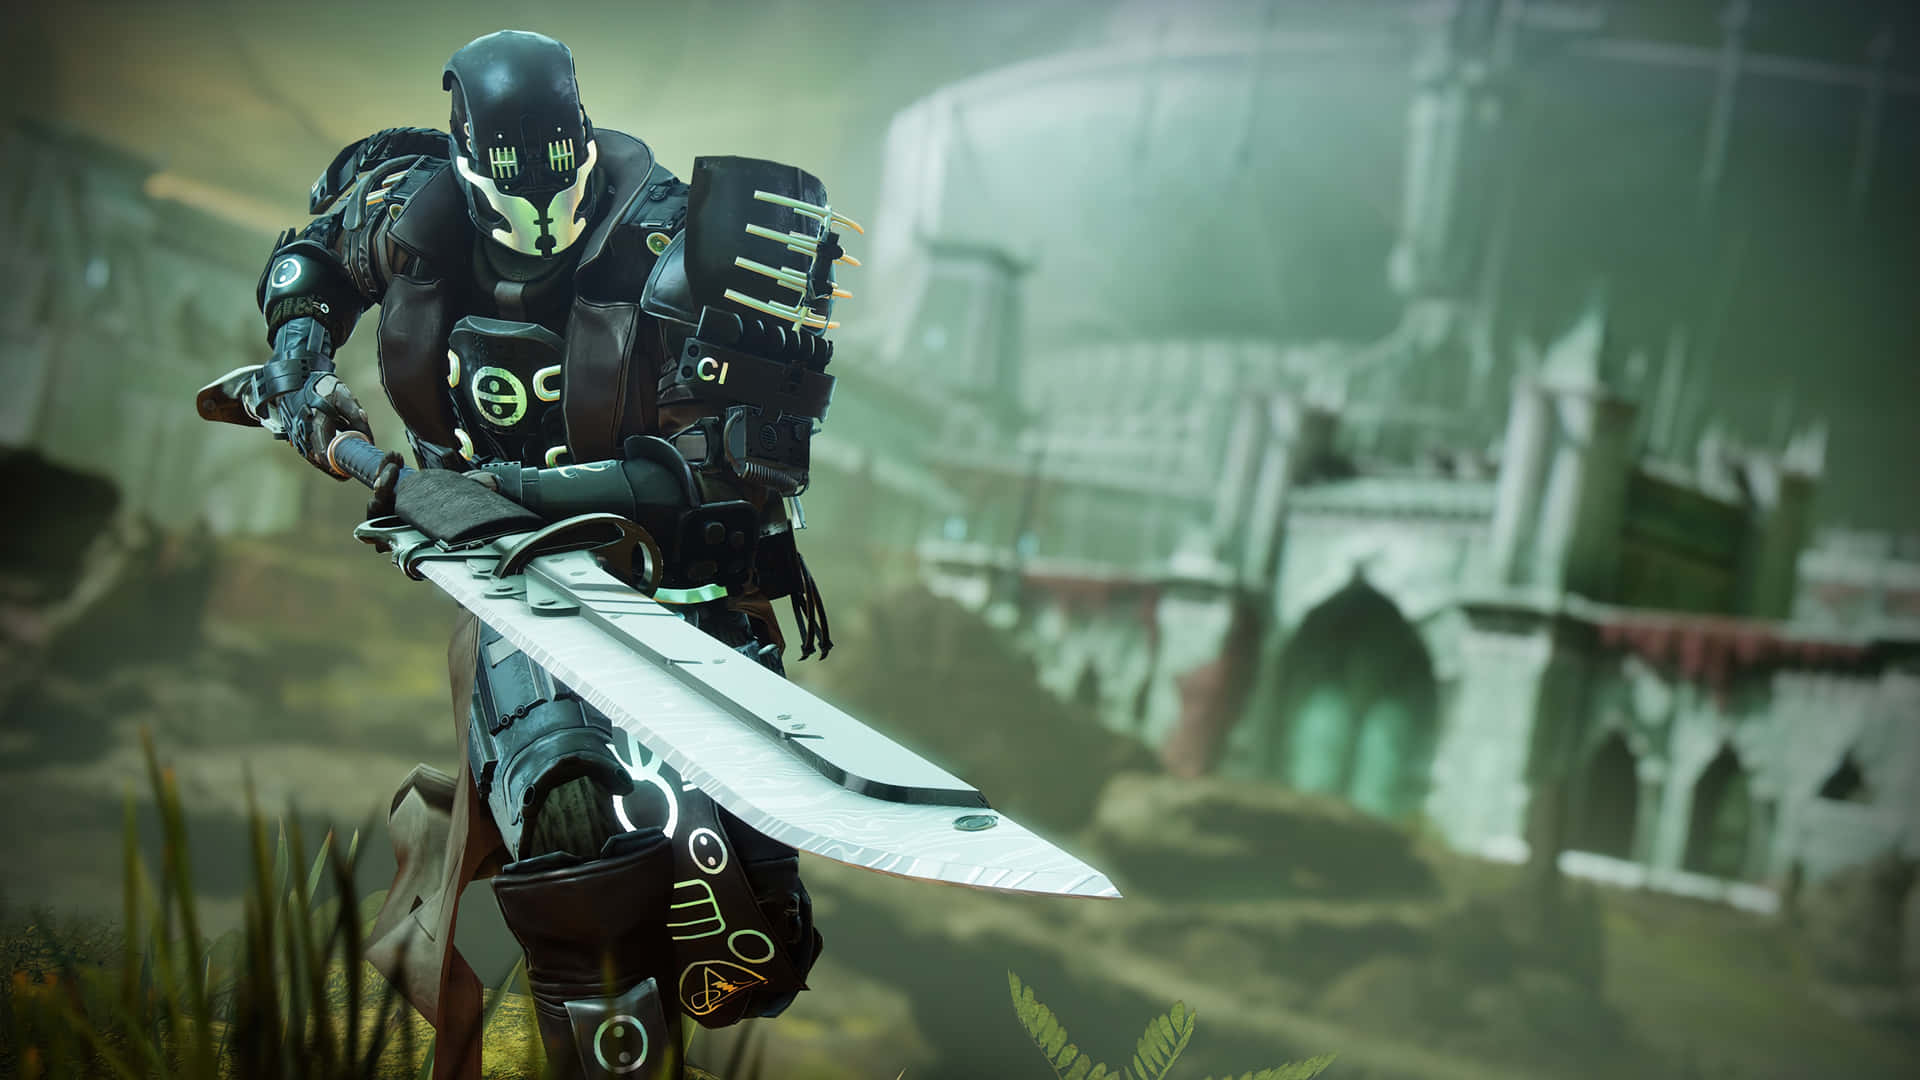 Ready your trusty weapon - the Titan takes on Destiny 2 with breathtaking 4k visuals Wallpaper